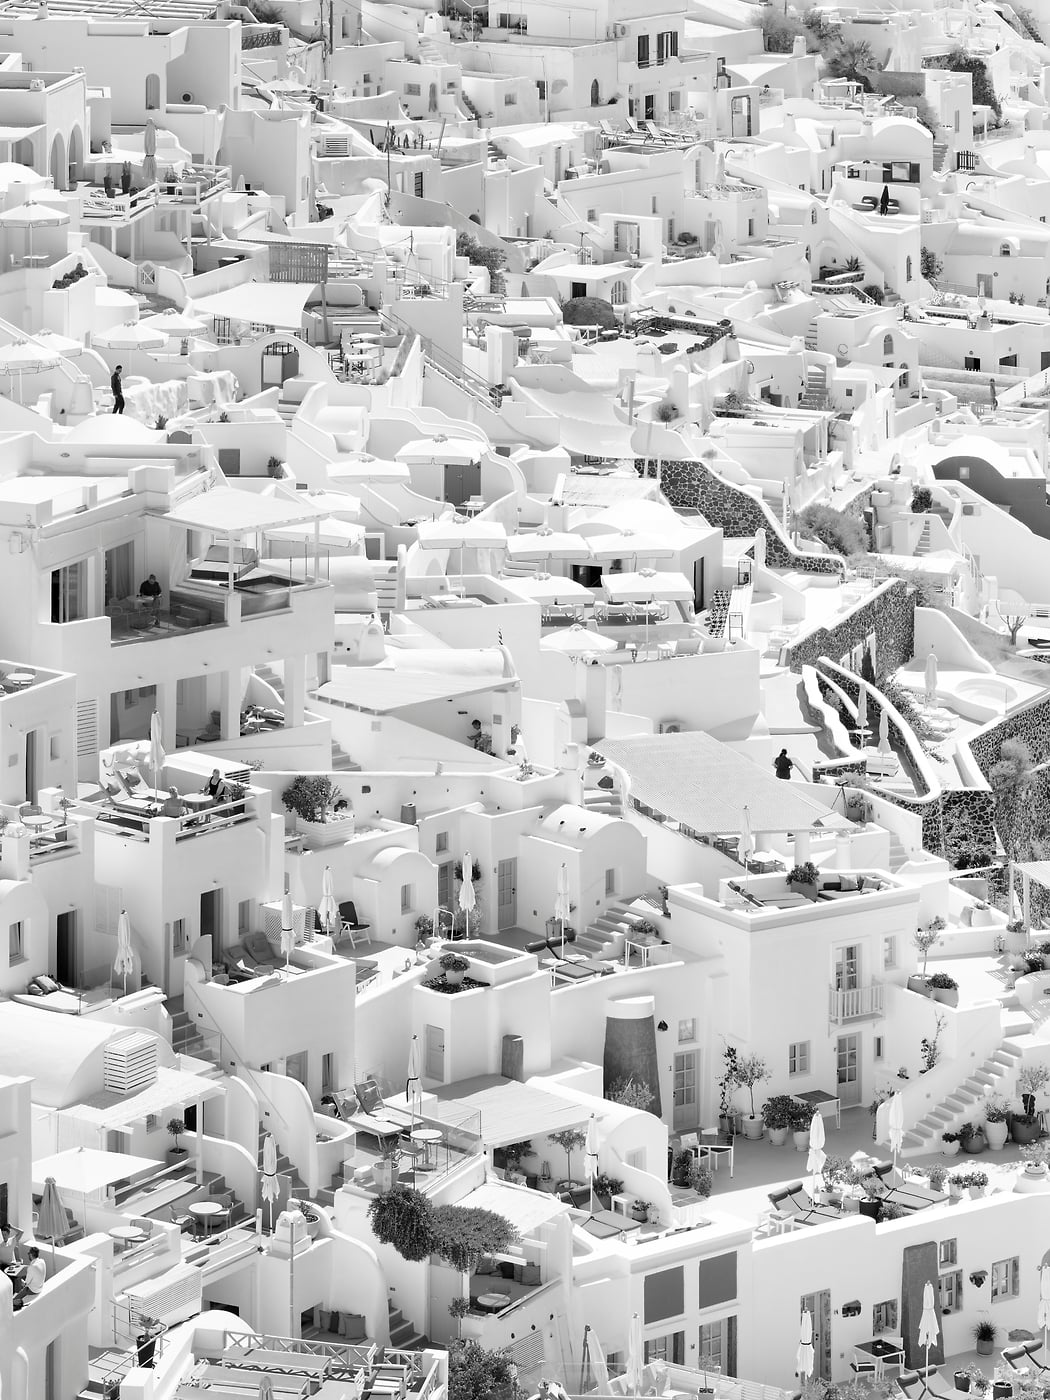 191 megapixels! A very high resolution, black & white VAST photo print of the cliffside buildings in Santorini, Greece; photograph created by Dan Piech.